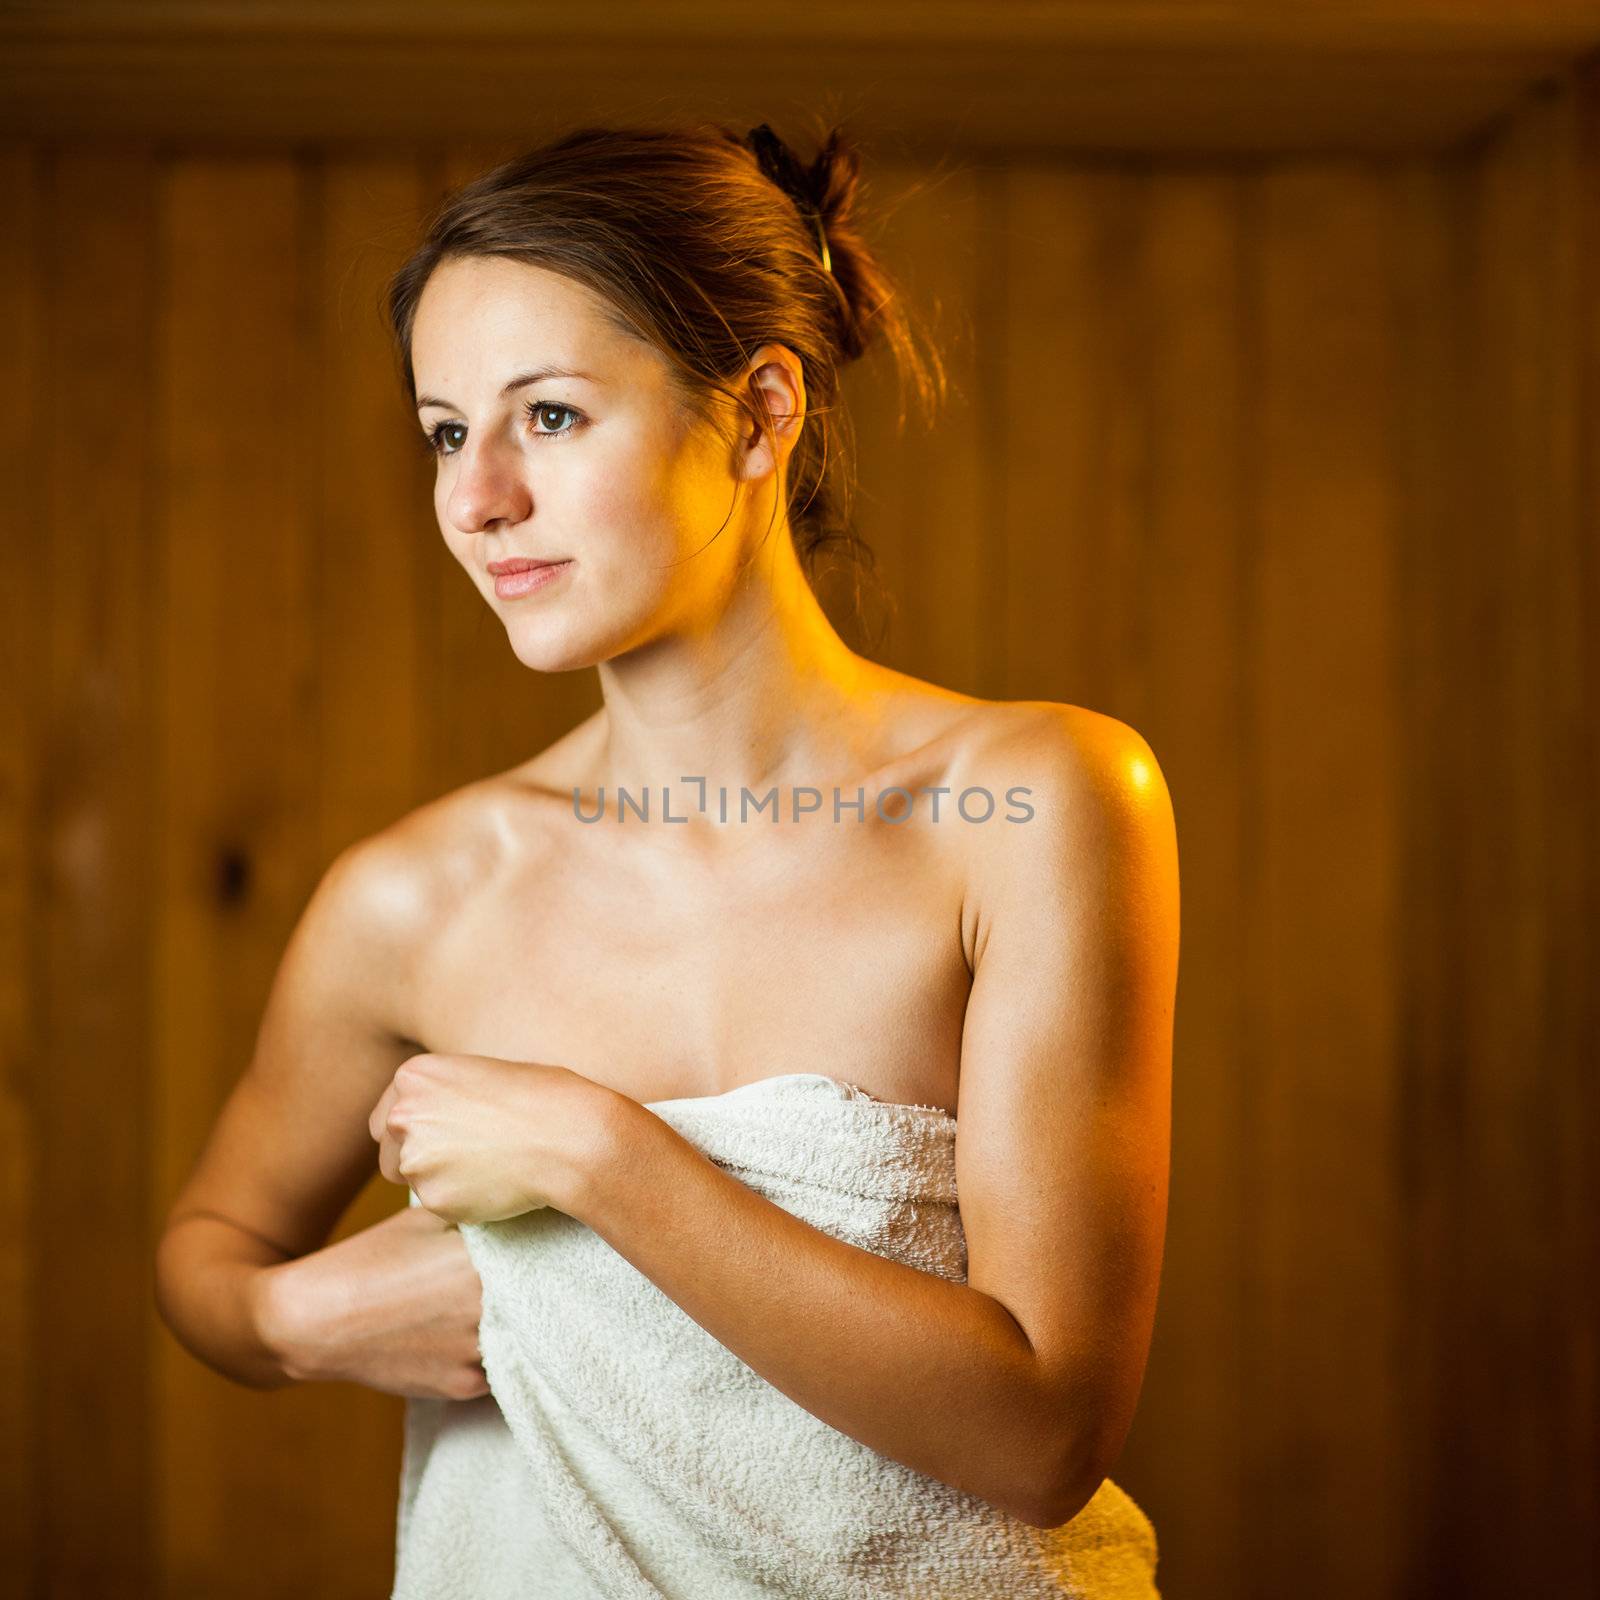 Young woman relaxing in a sauna by viktor_cap